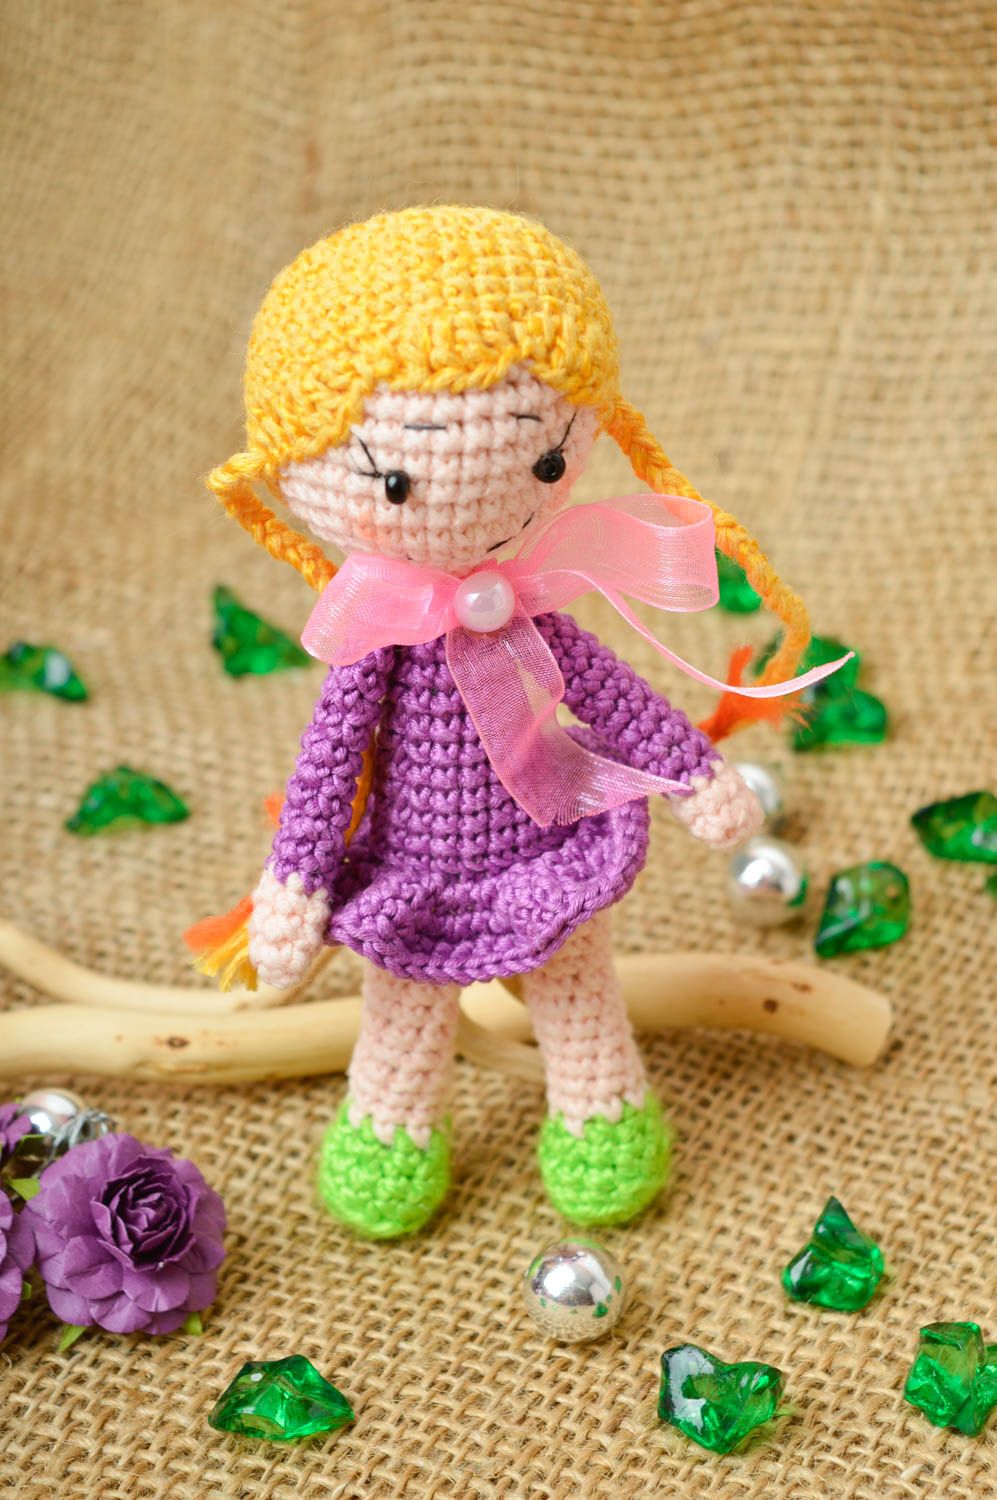 Cute doll handmade crocheted toy for children stuffed toys hand-crocheted toys photo 1